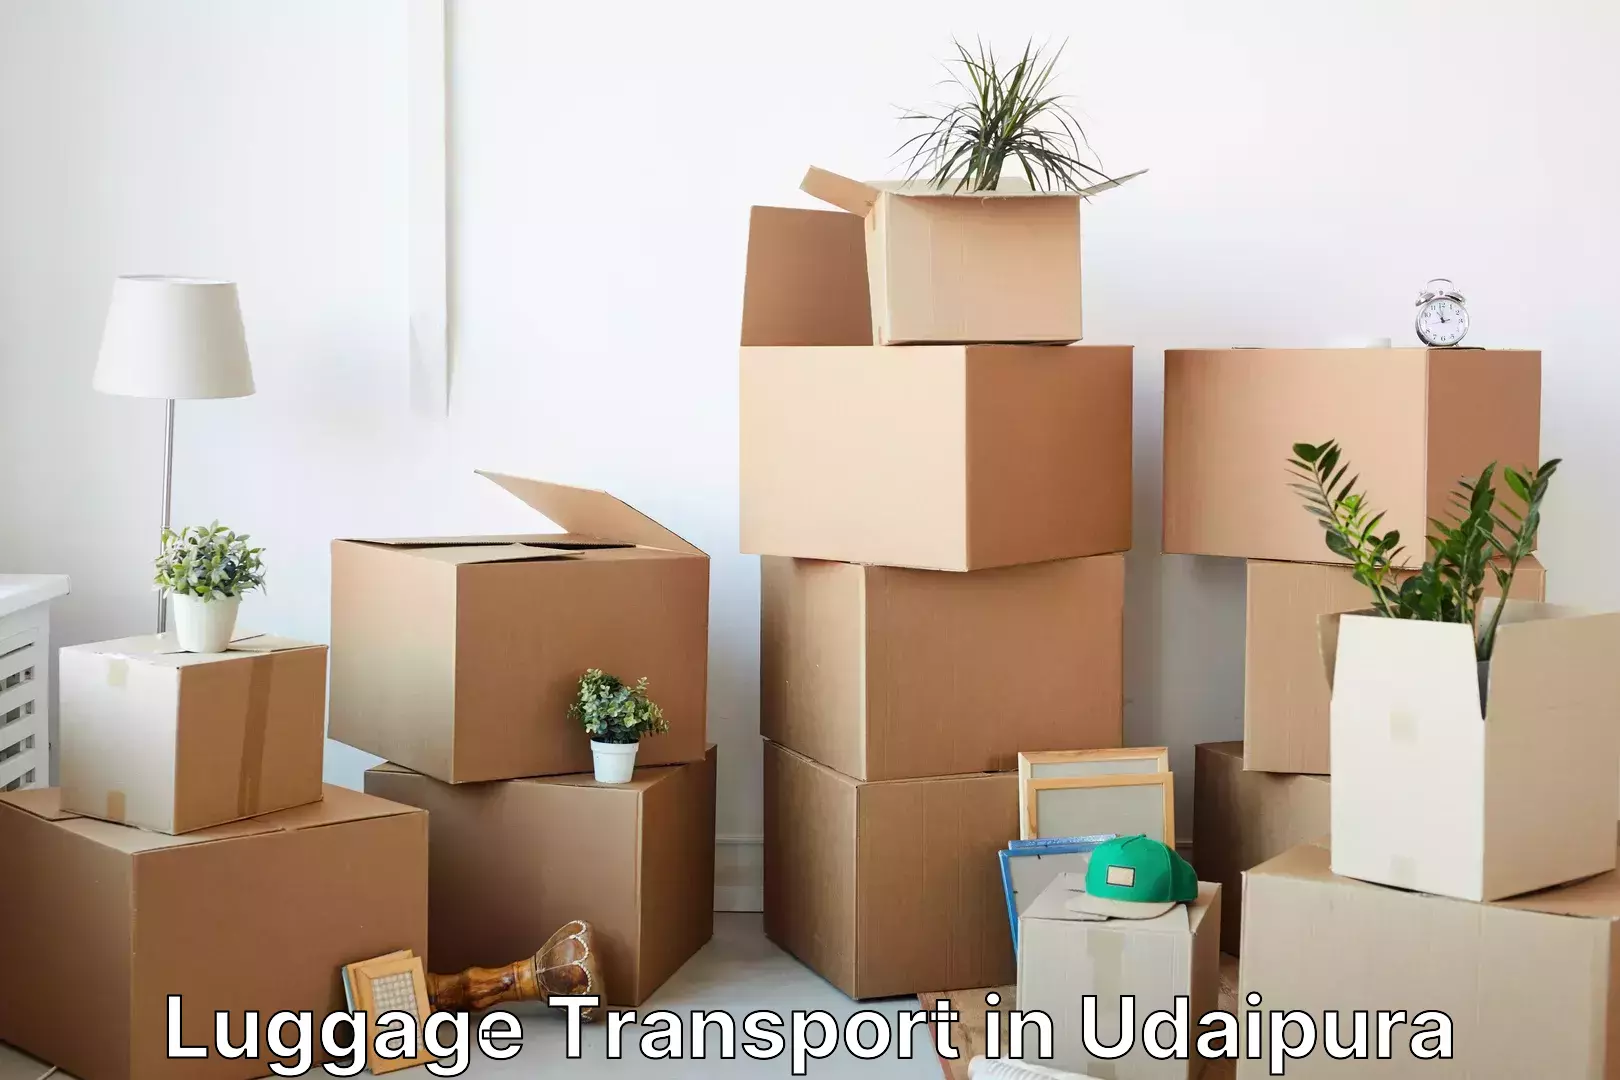 Airport luggage delivery in Udaipura